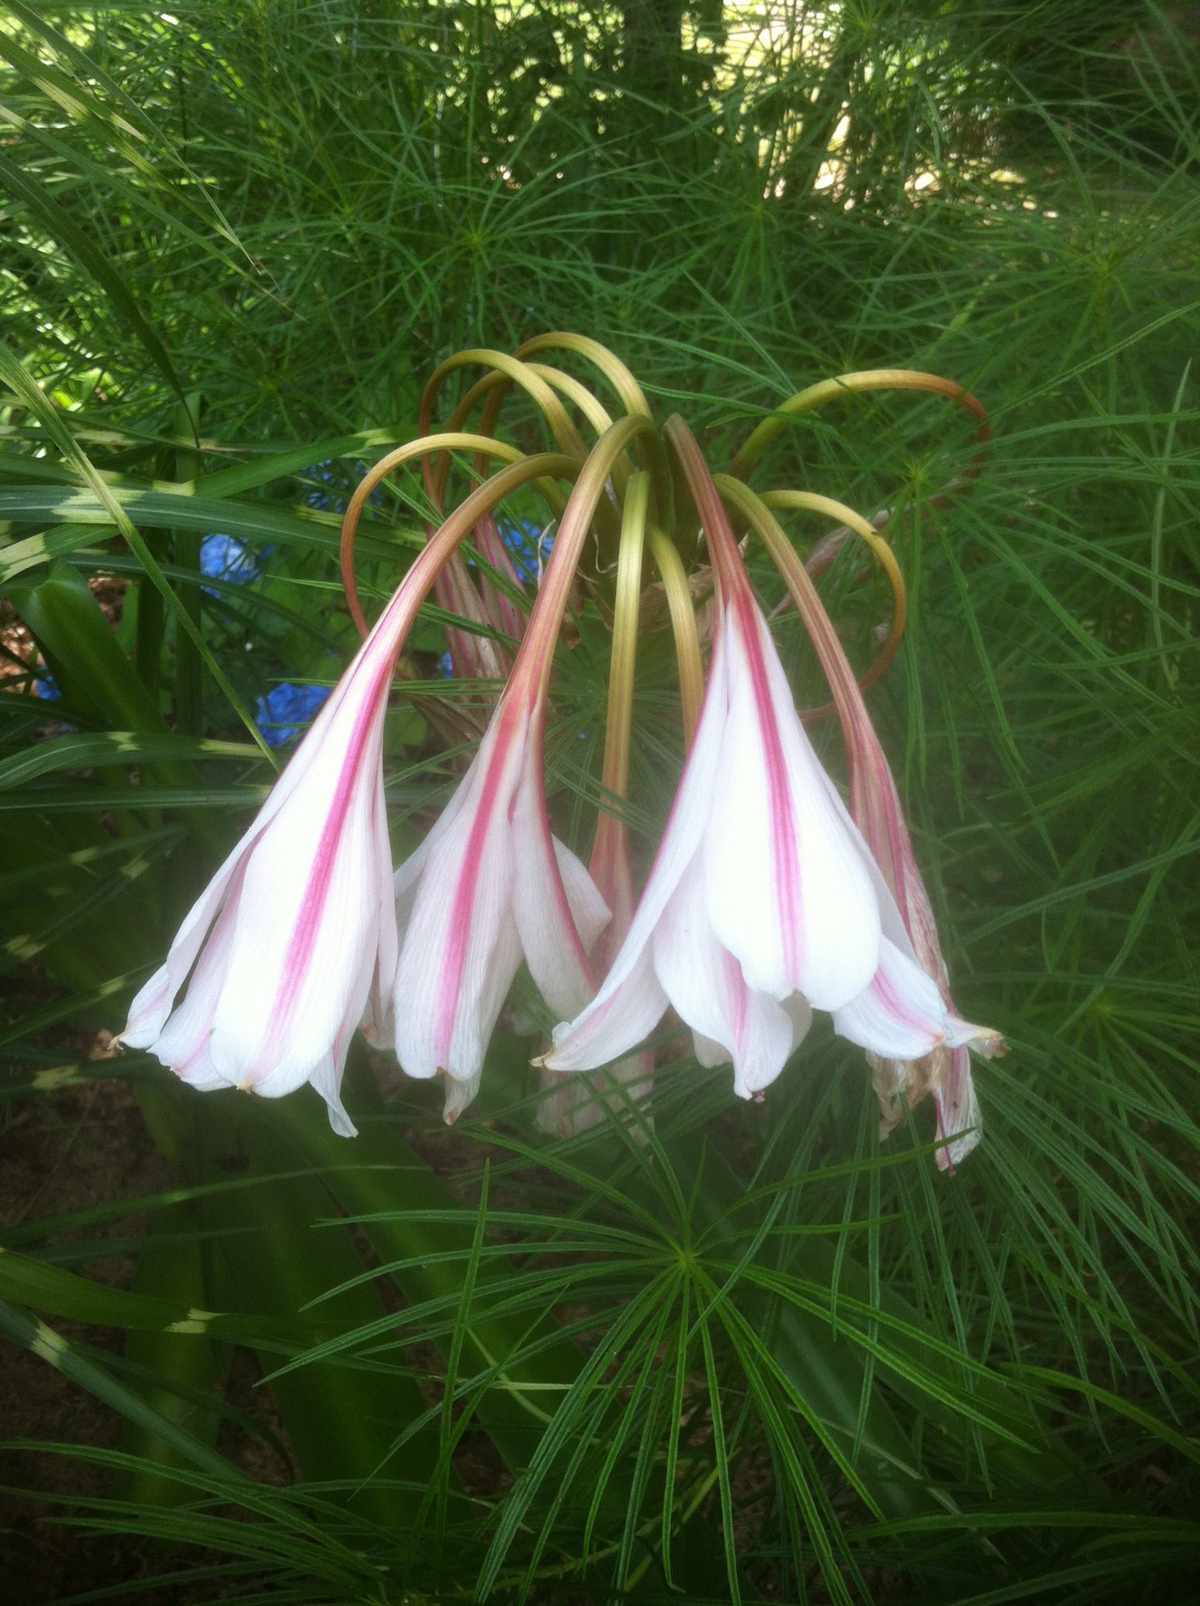 Milk-and-wine lily